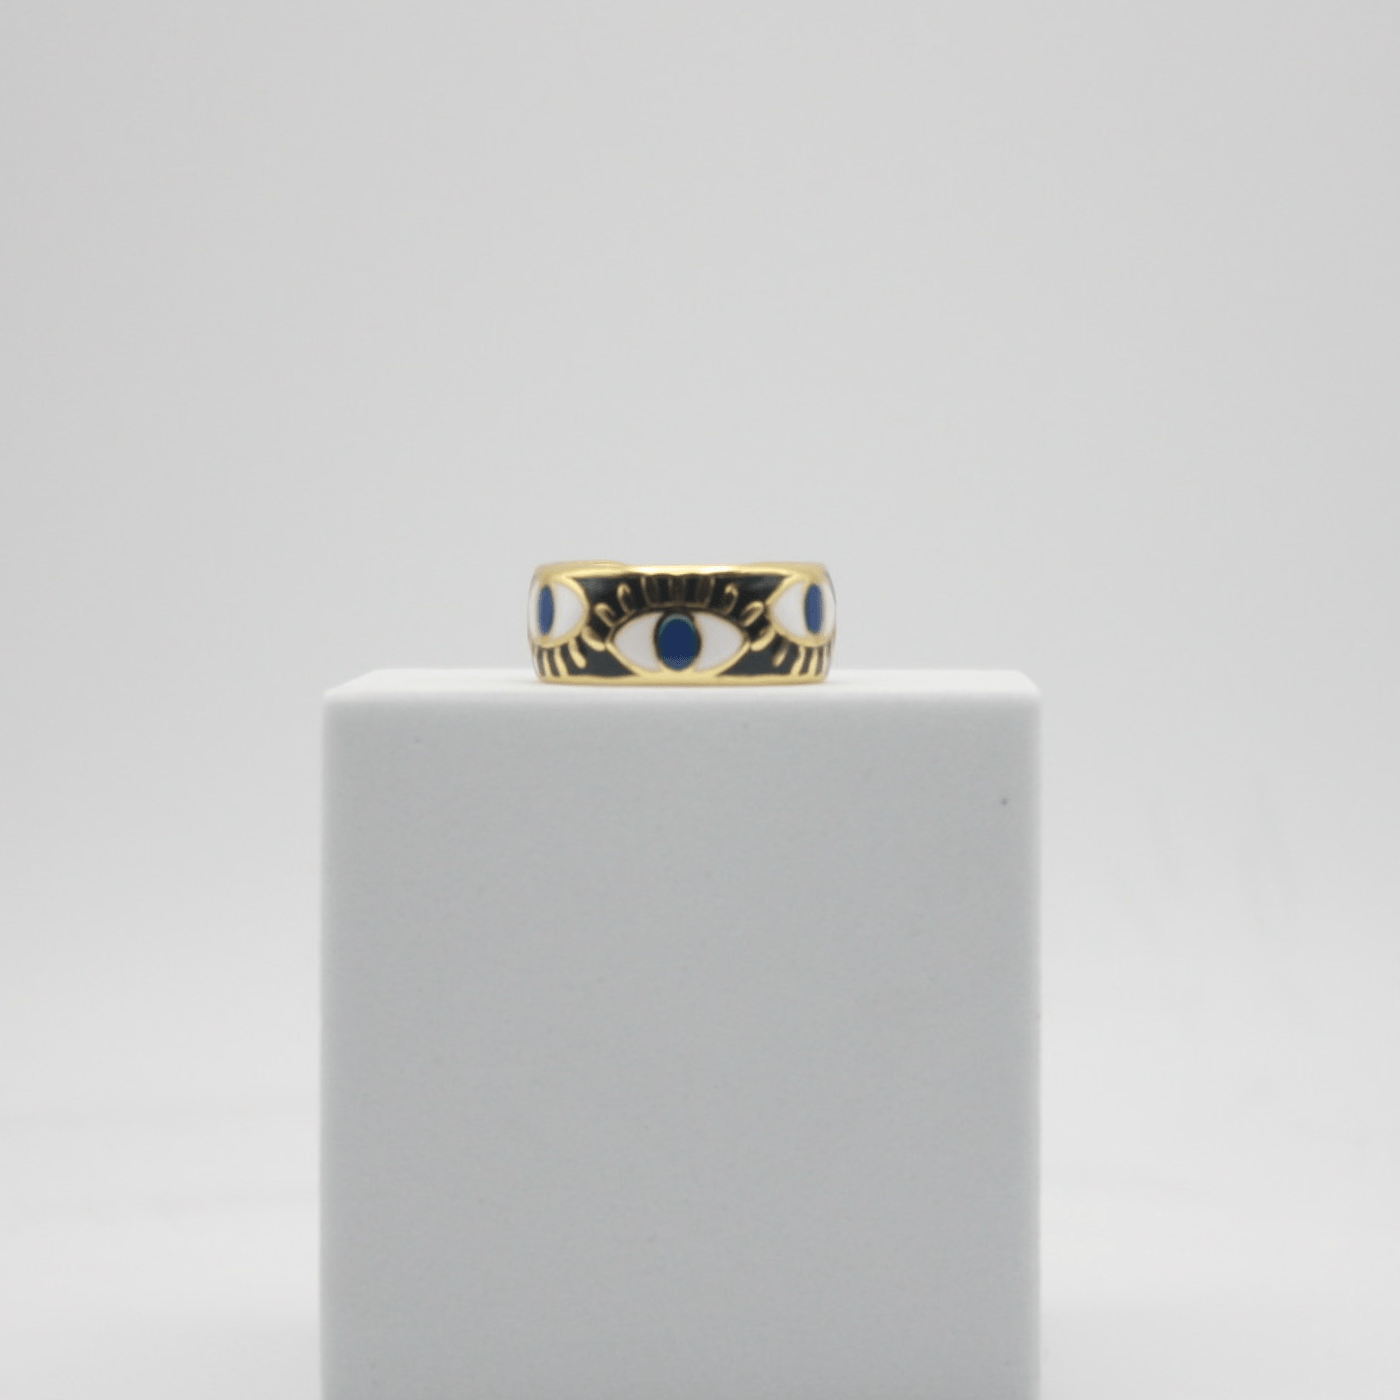 Nazar (Evil Eye Protection) Ring - The Poison Path